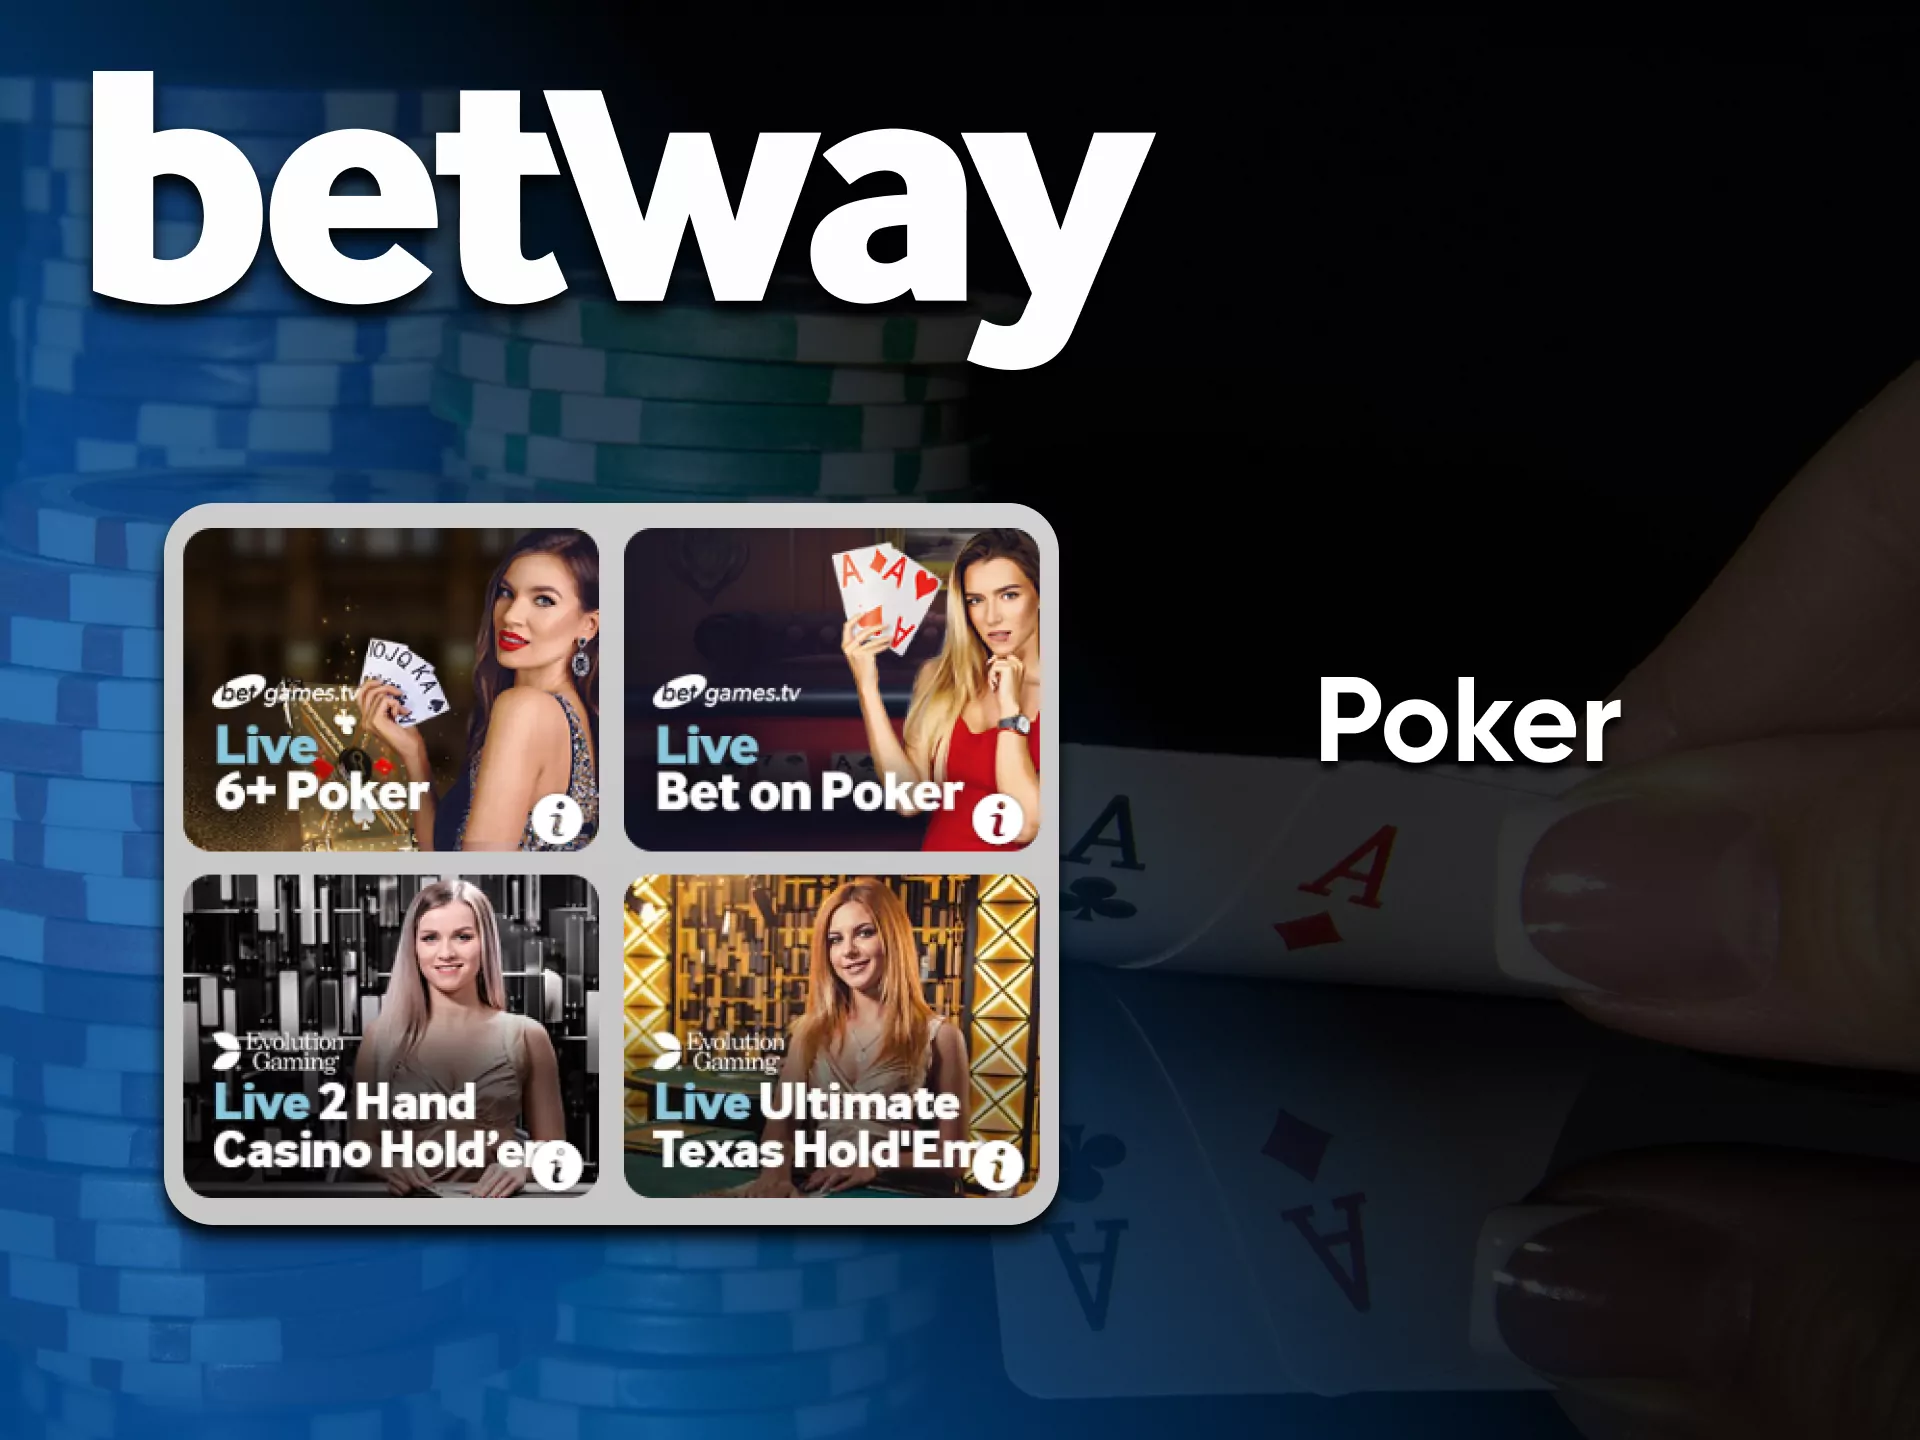 Choose Poker in the casino Betway to play with real dealers.